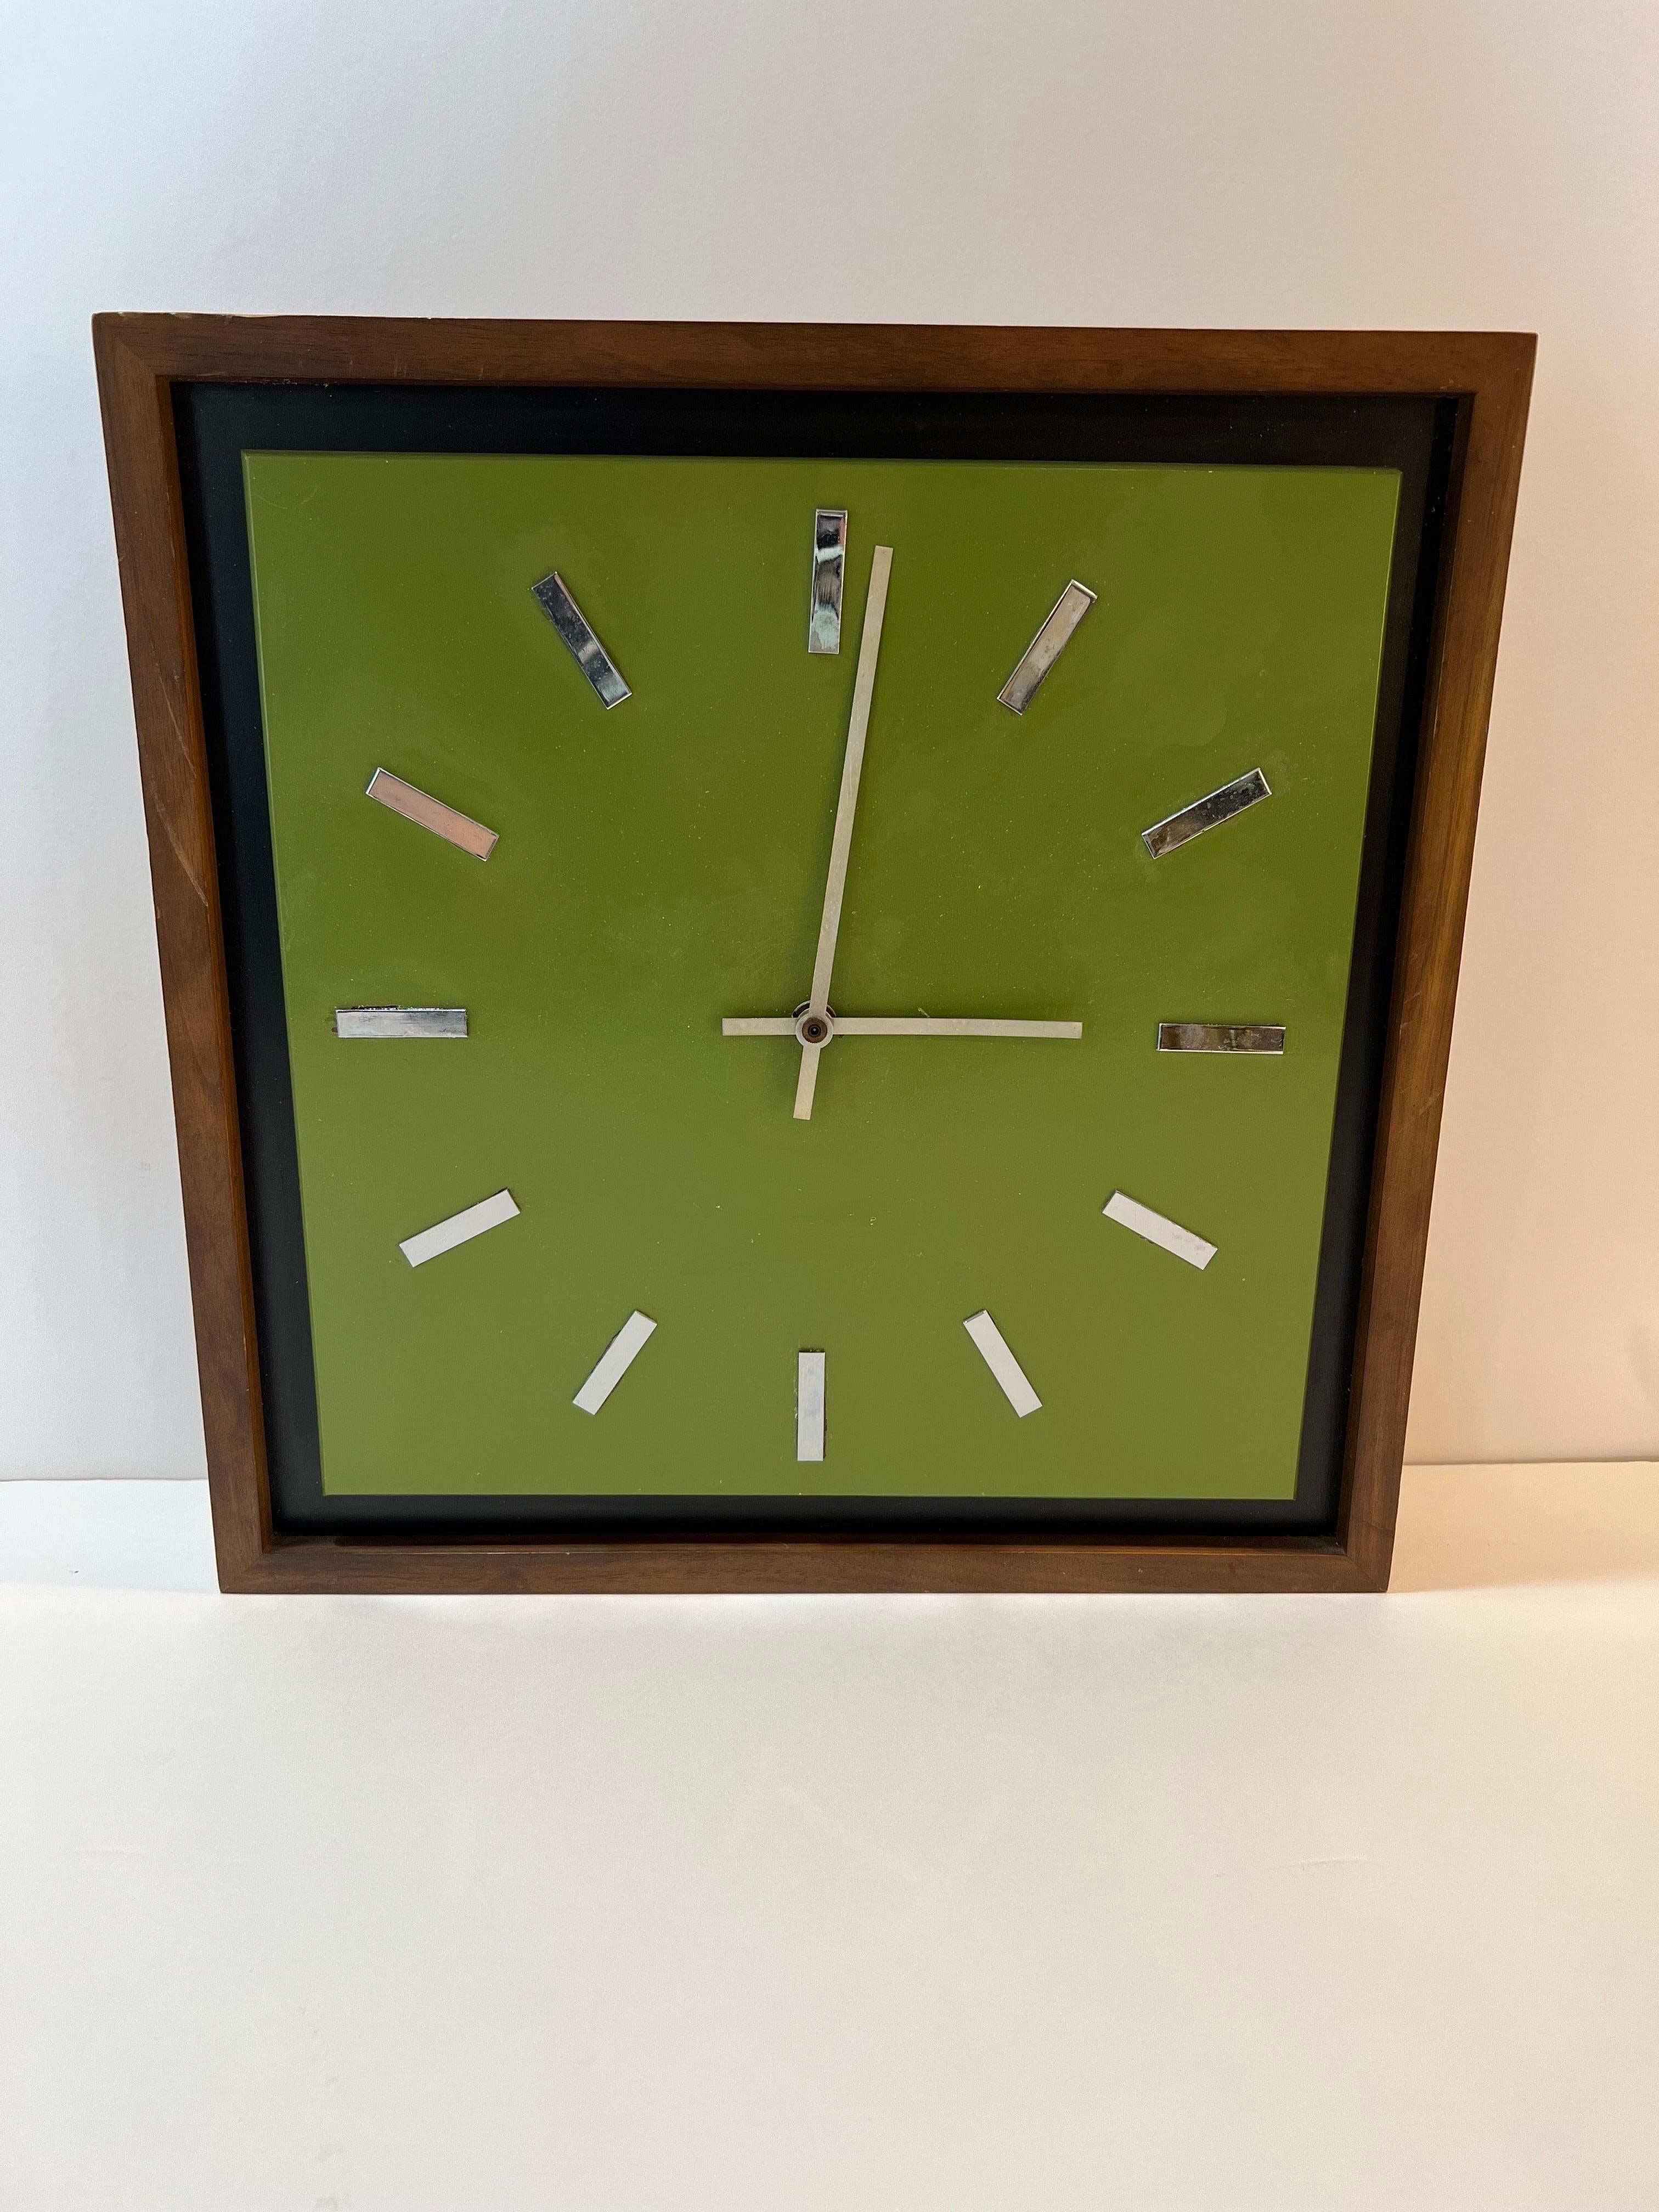 Midcentury Peter Pepper Wall Clock . Classic avocado green background with all wooden frame. Chrome digits make up this minimalist clock face. Works perfectly on a large C battery.